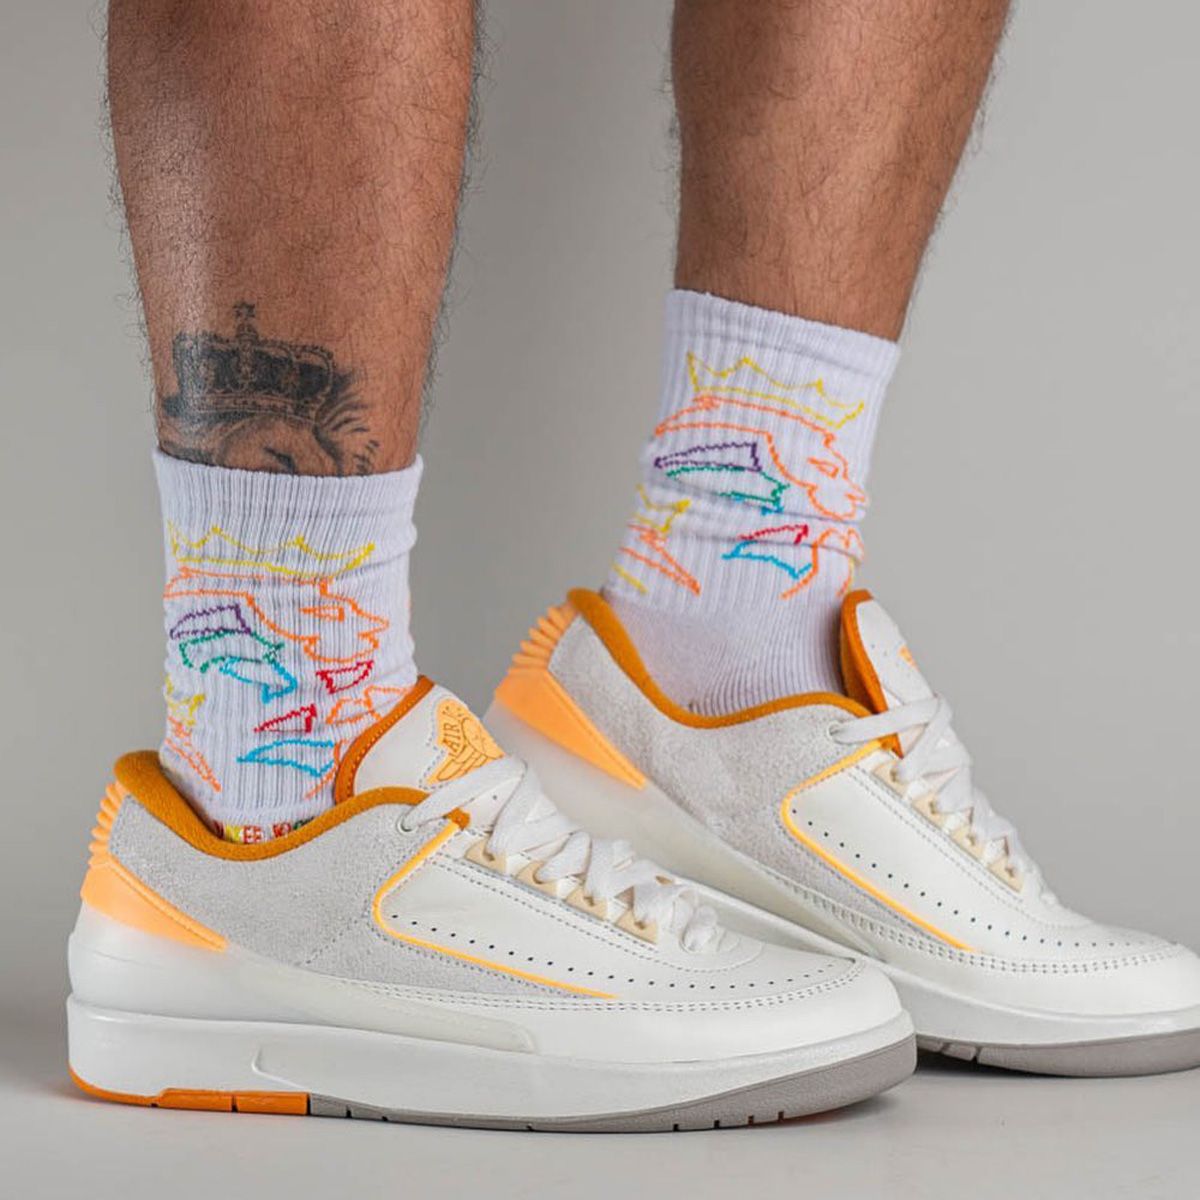 Where to Buy the Air Jordan 2 Low Craft “Melon Tint” | House of Heat°